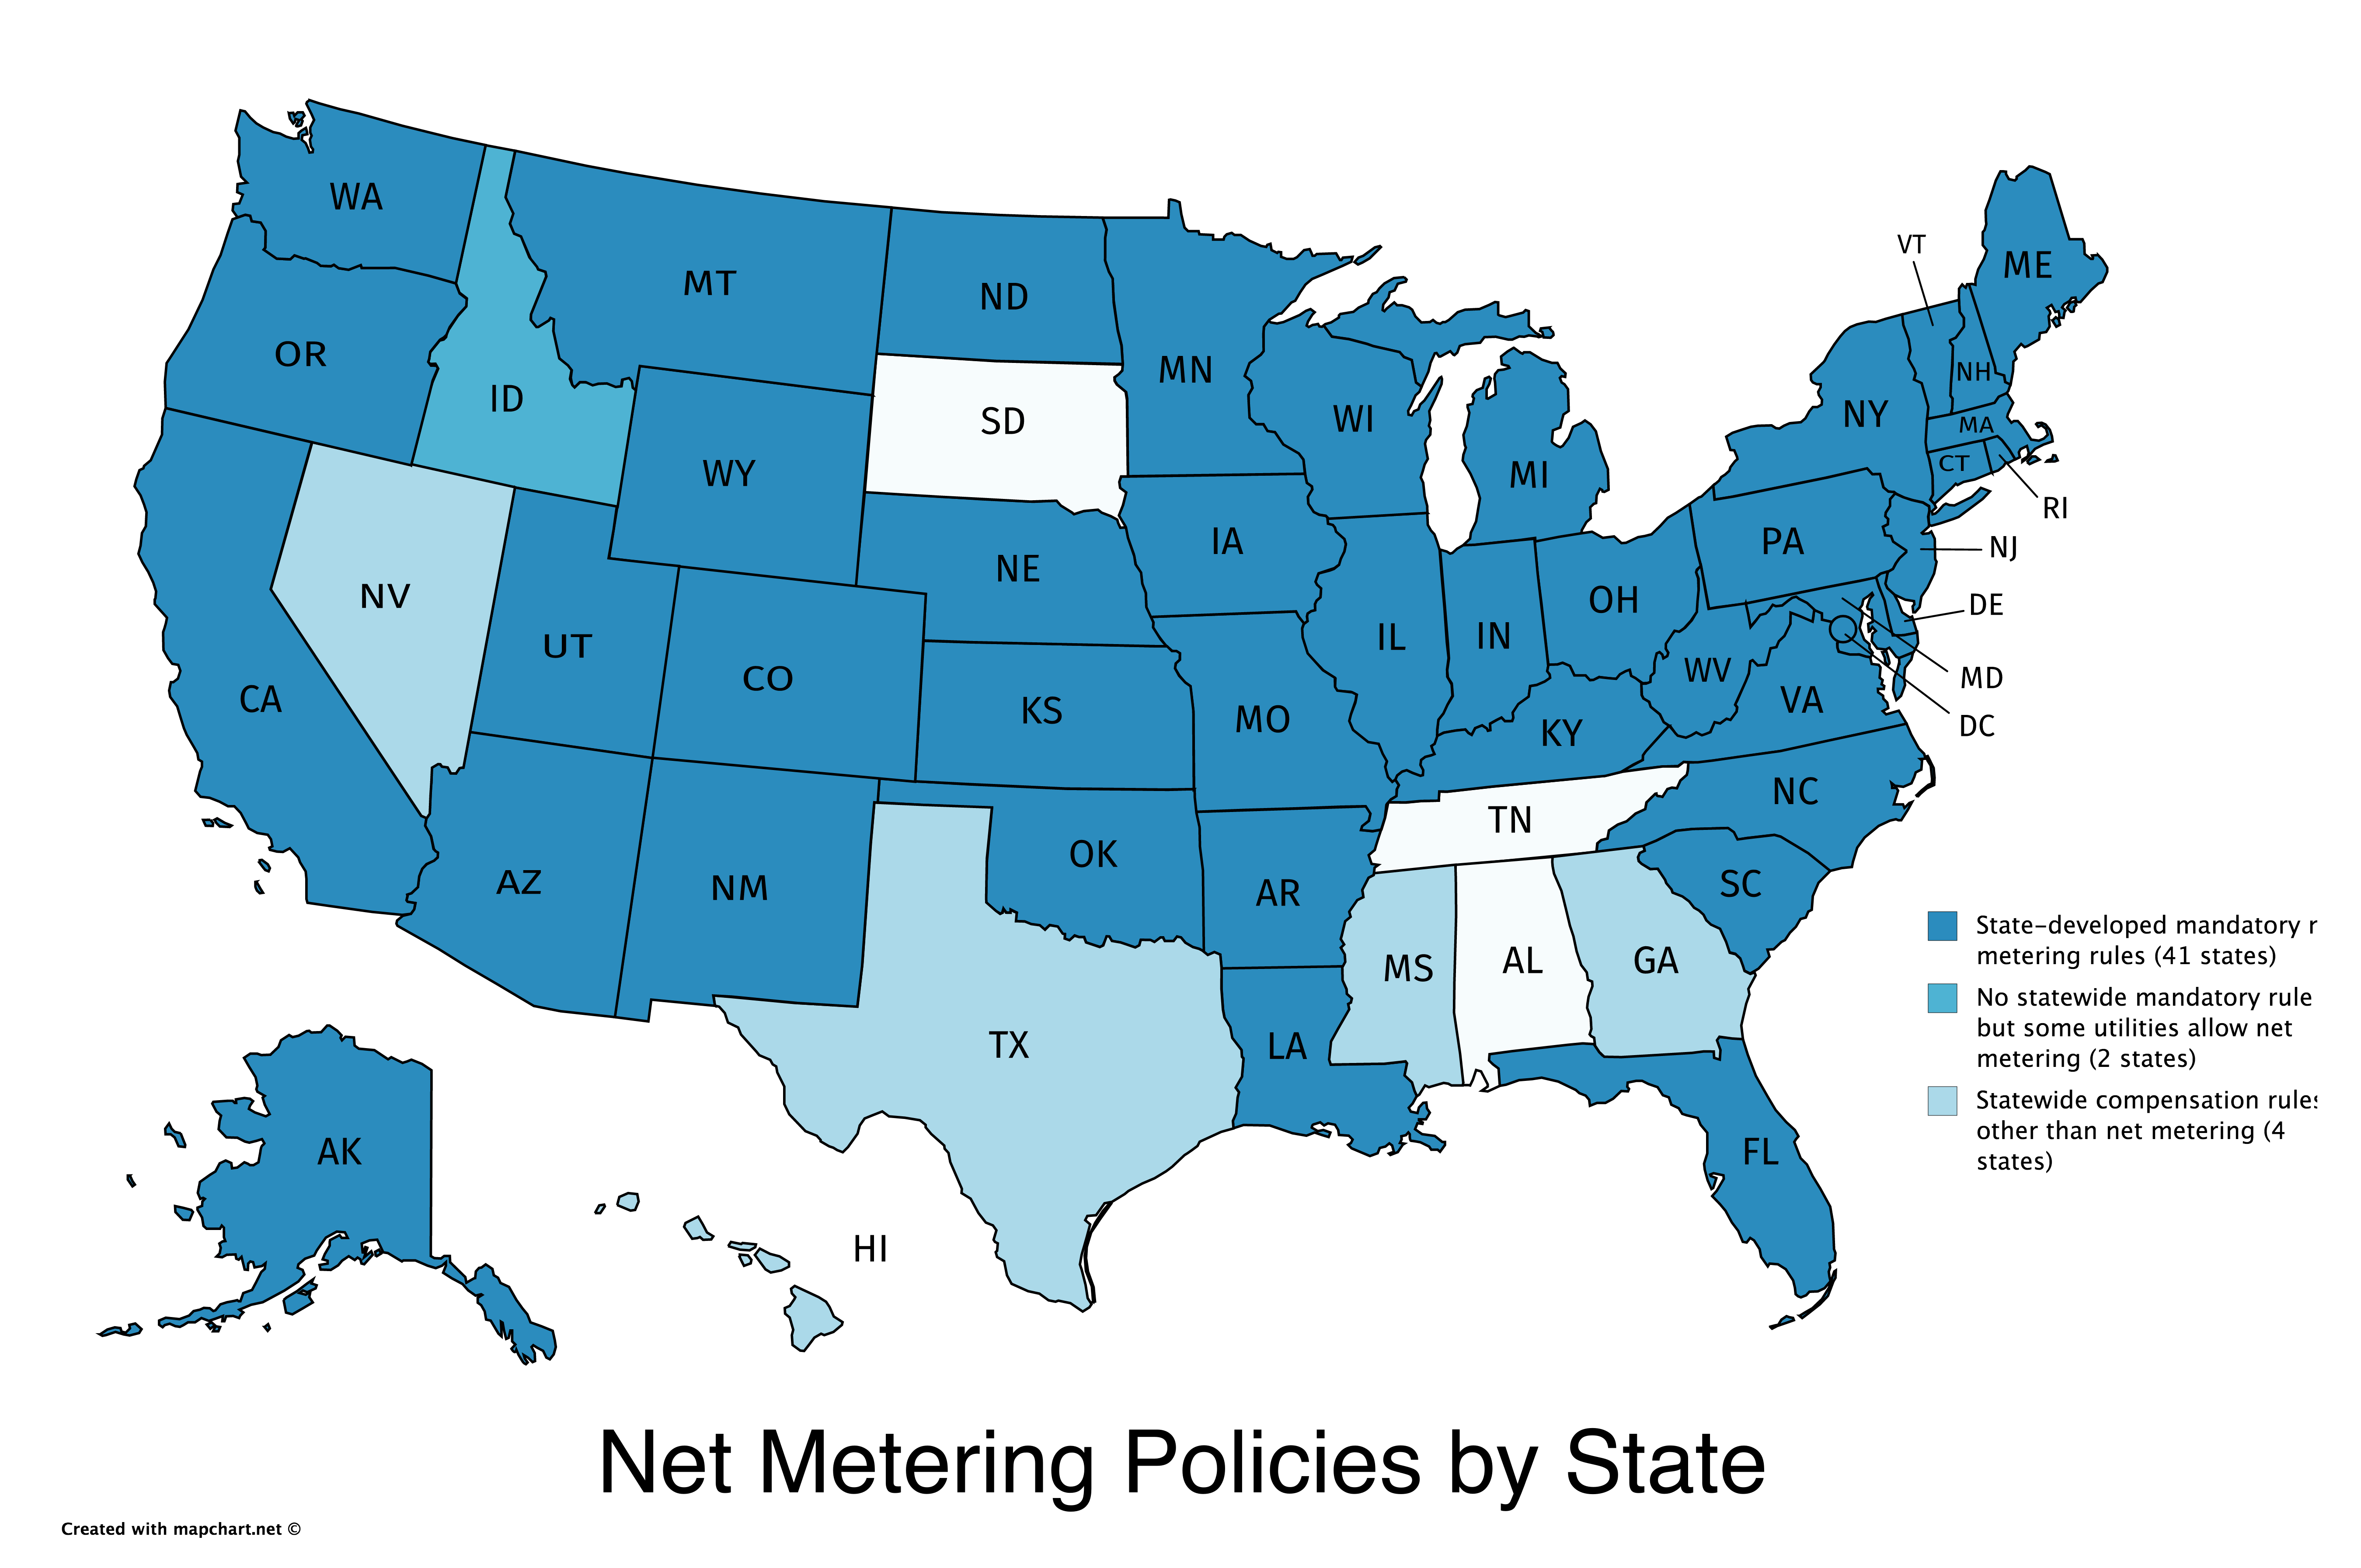 States with net metering policies